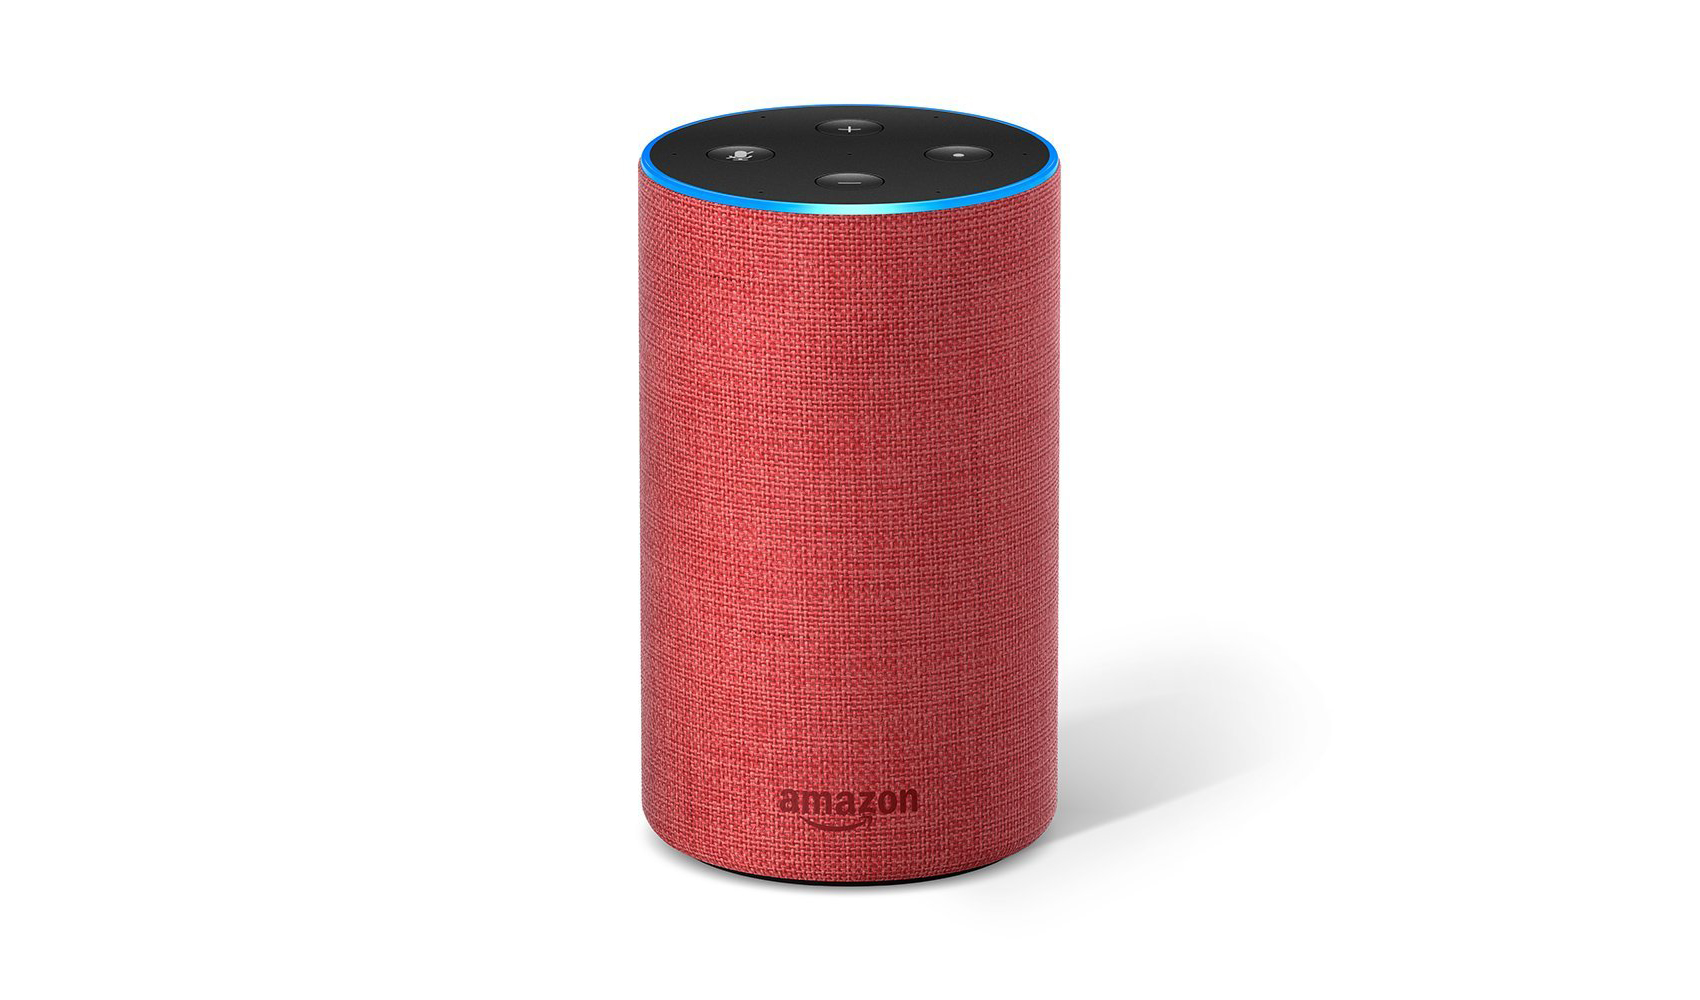 photo of Amazon’s all-new Echo goes (RED) for a limited time image